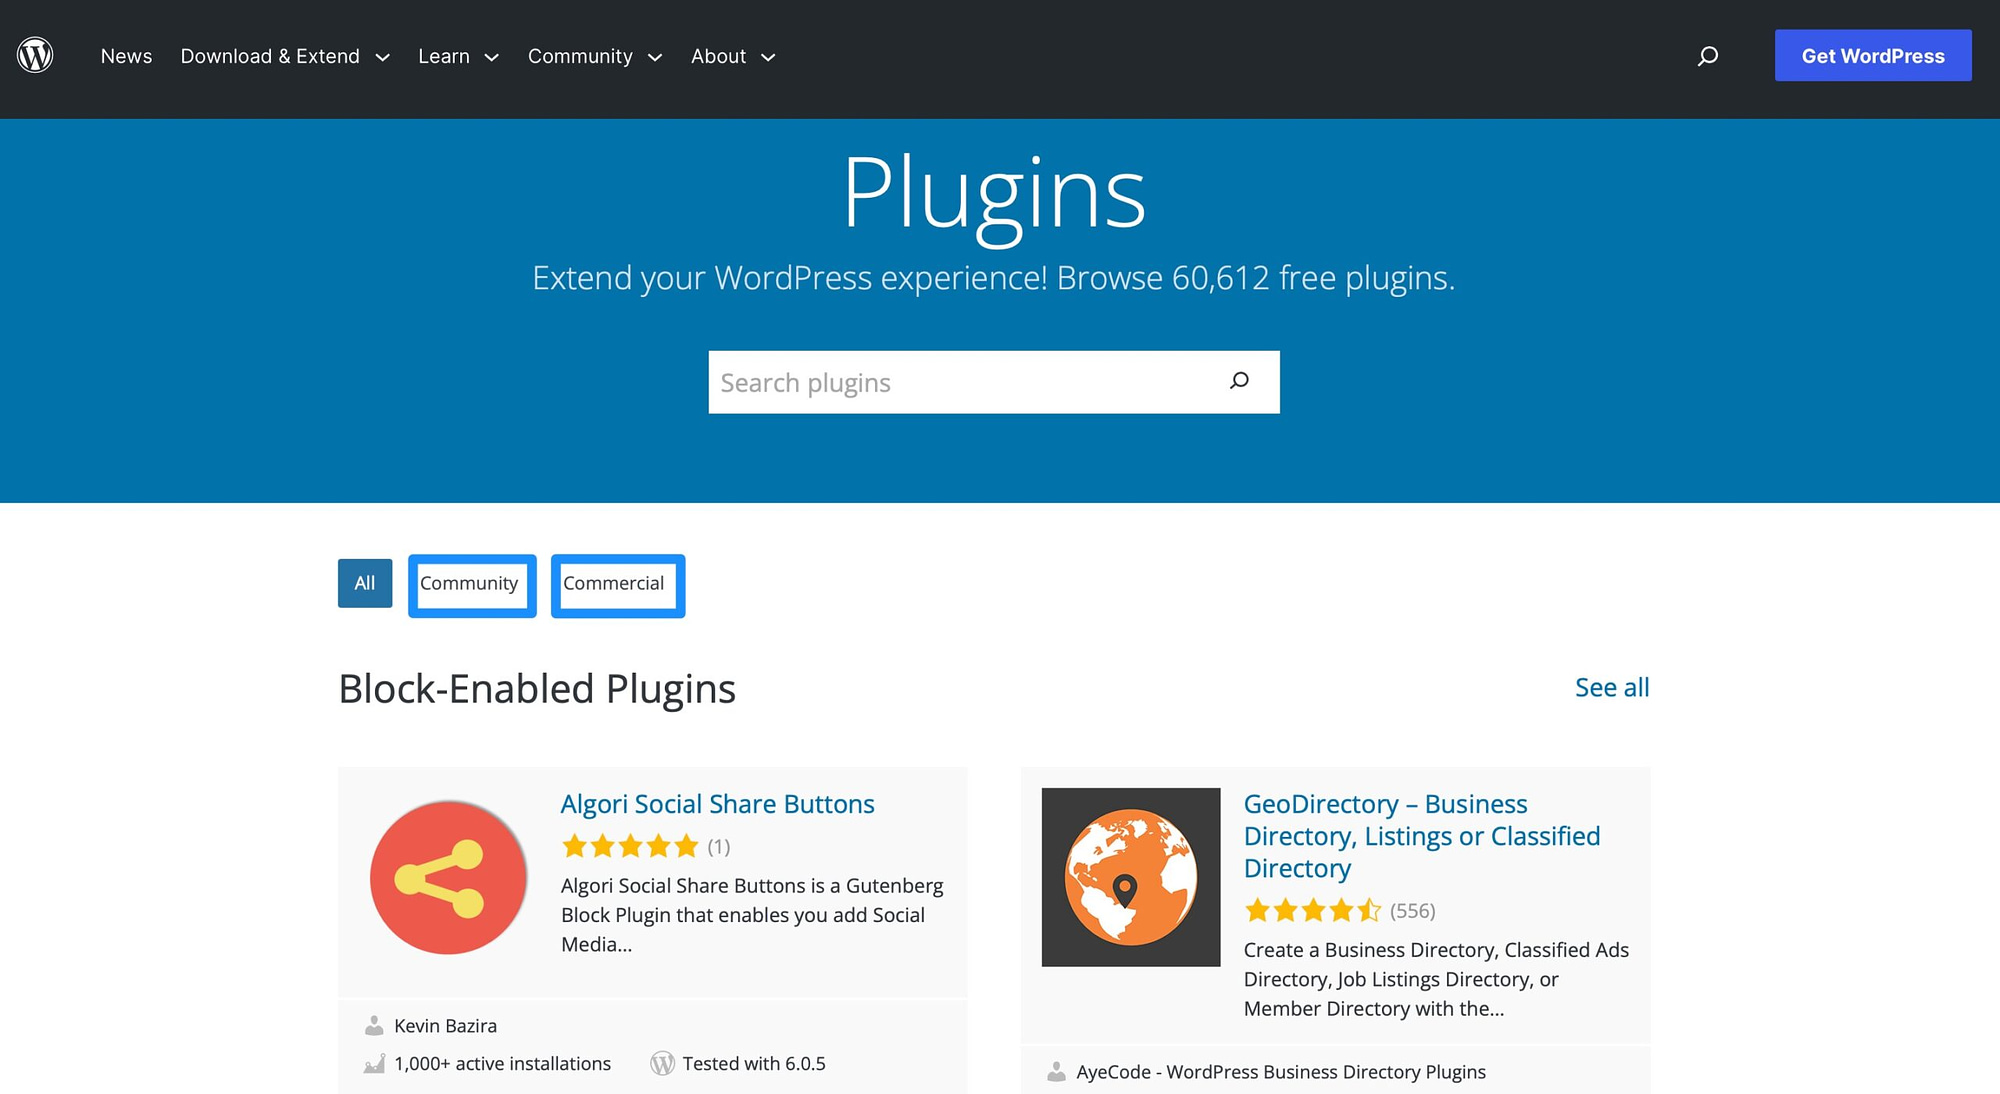 Community vs commercial plugins in the WordPress repository.